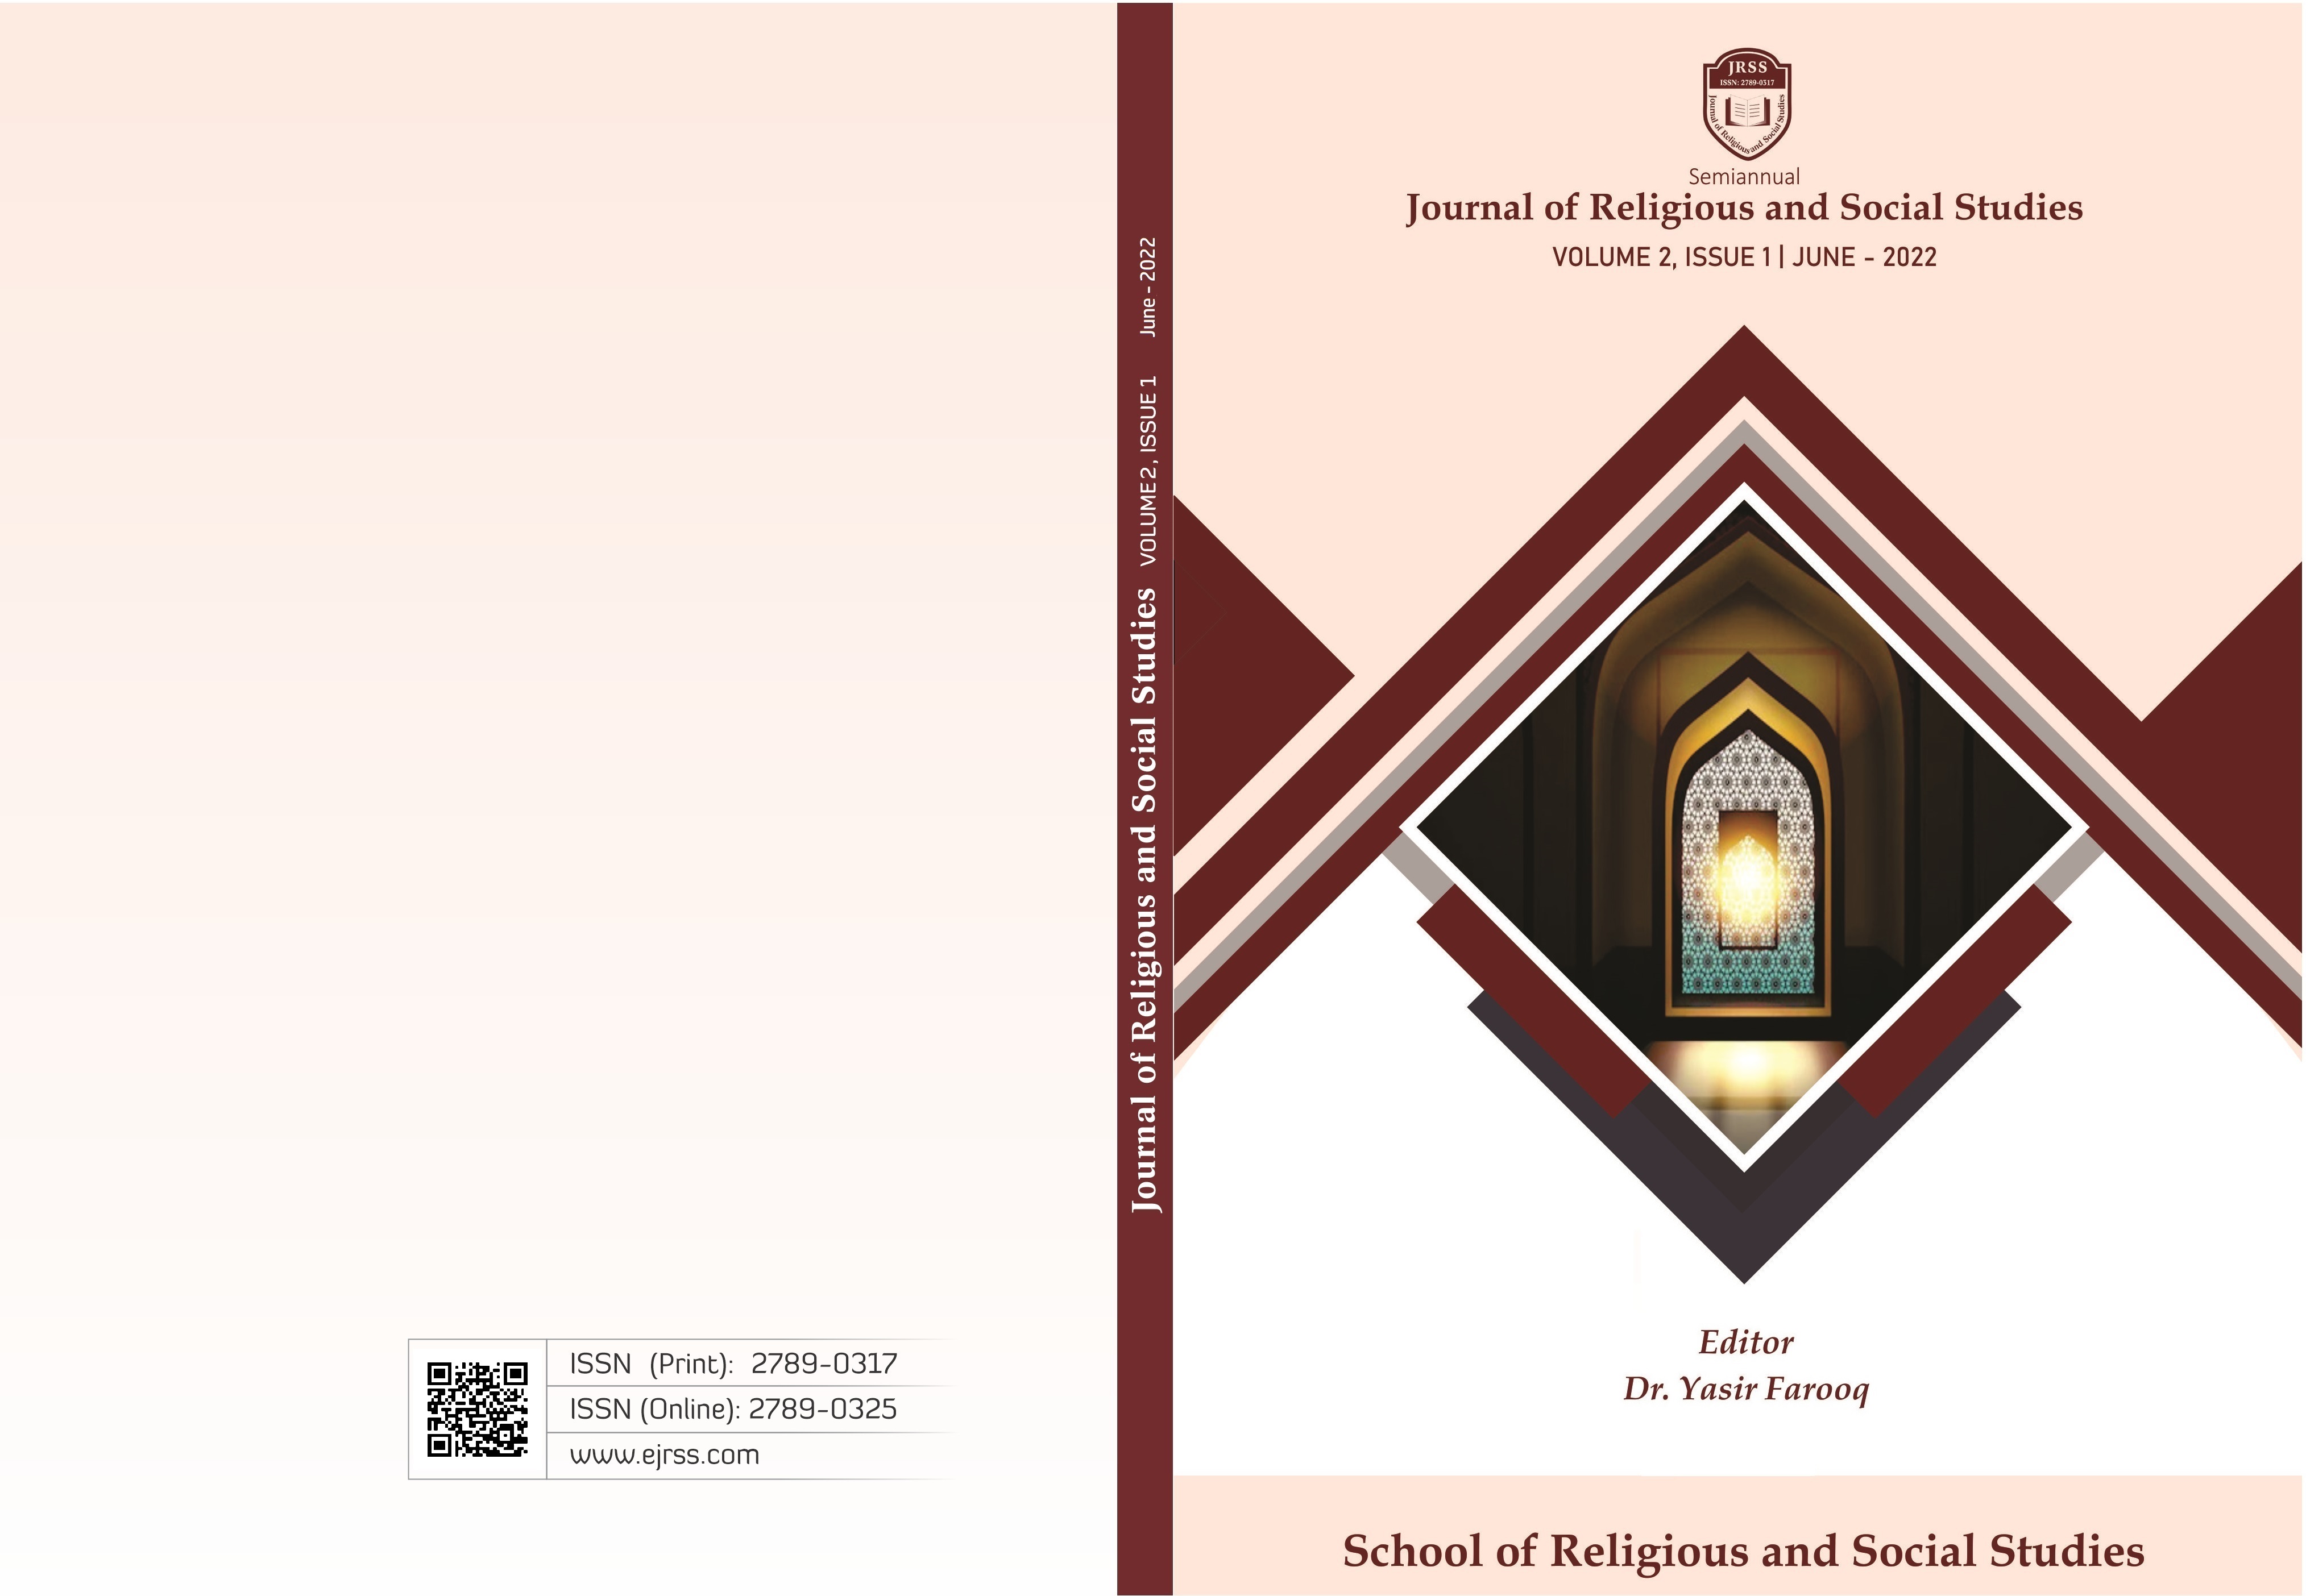 					View Vol. 2 No. 01 (2022): Journal of Religious and Social Studies-JRSS
				